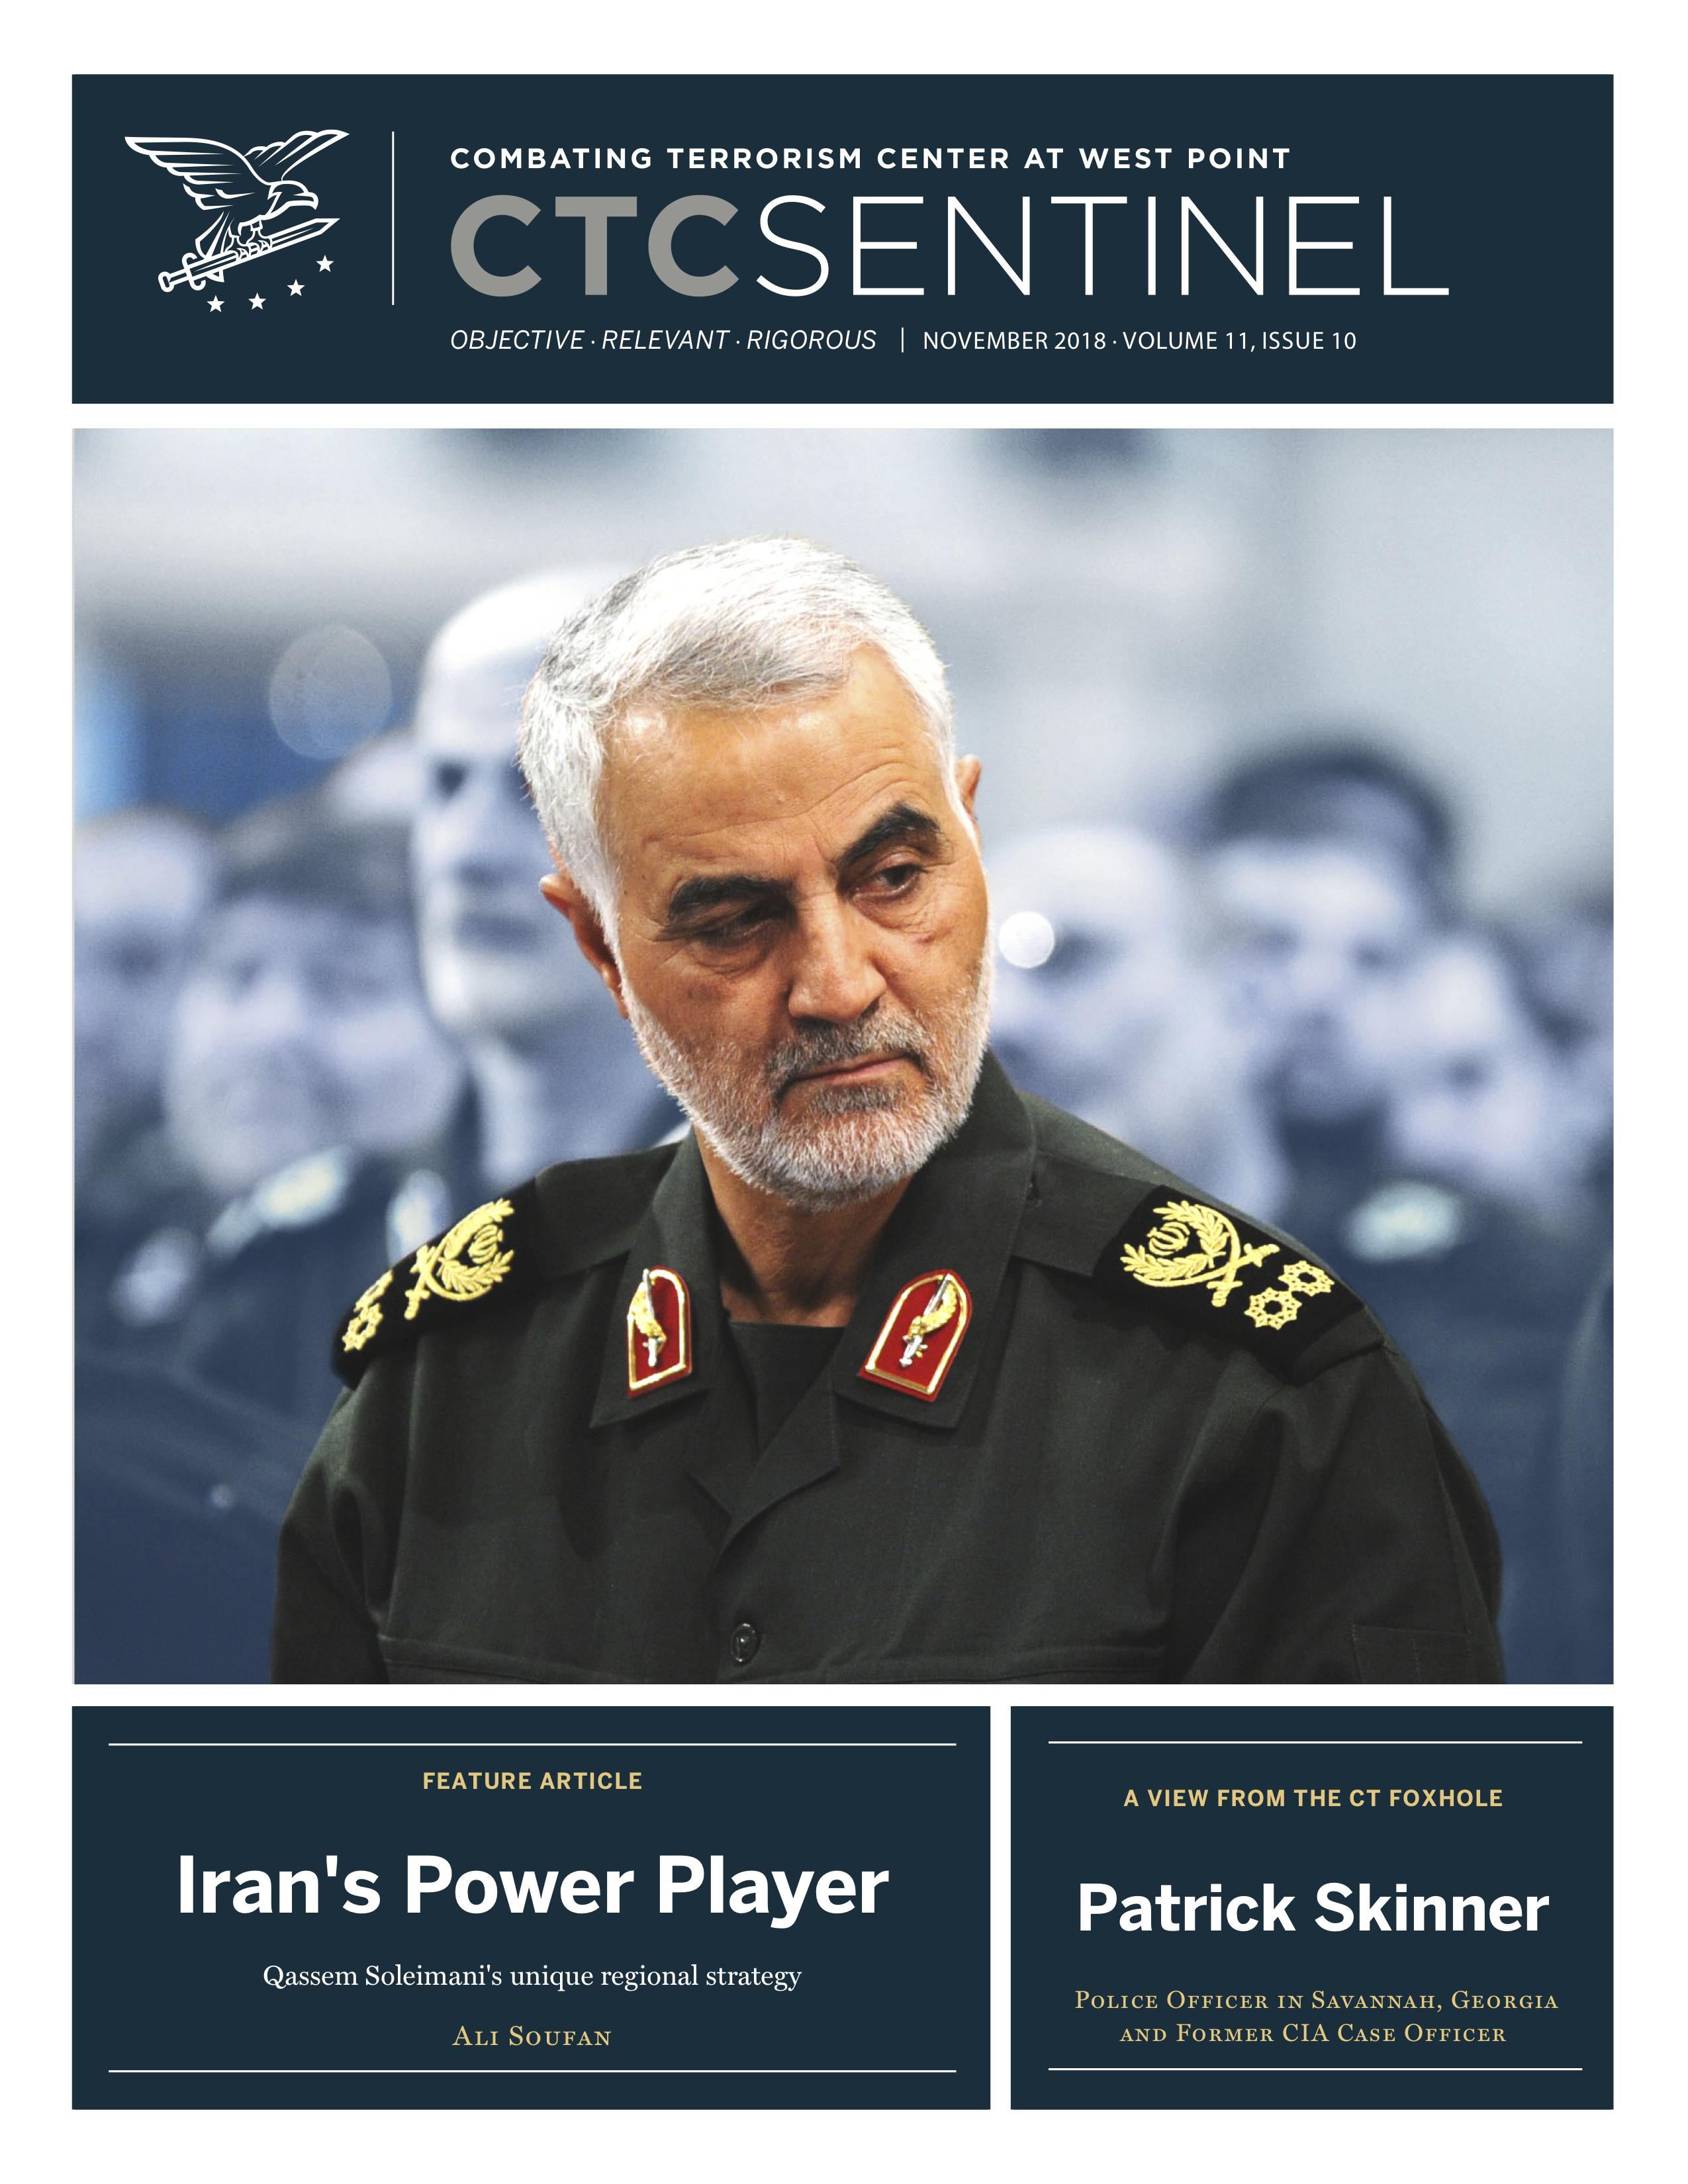 IntelBrief: The Complexity of Peacekeeping Operations - The Soufan Center